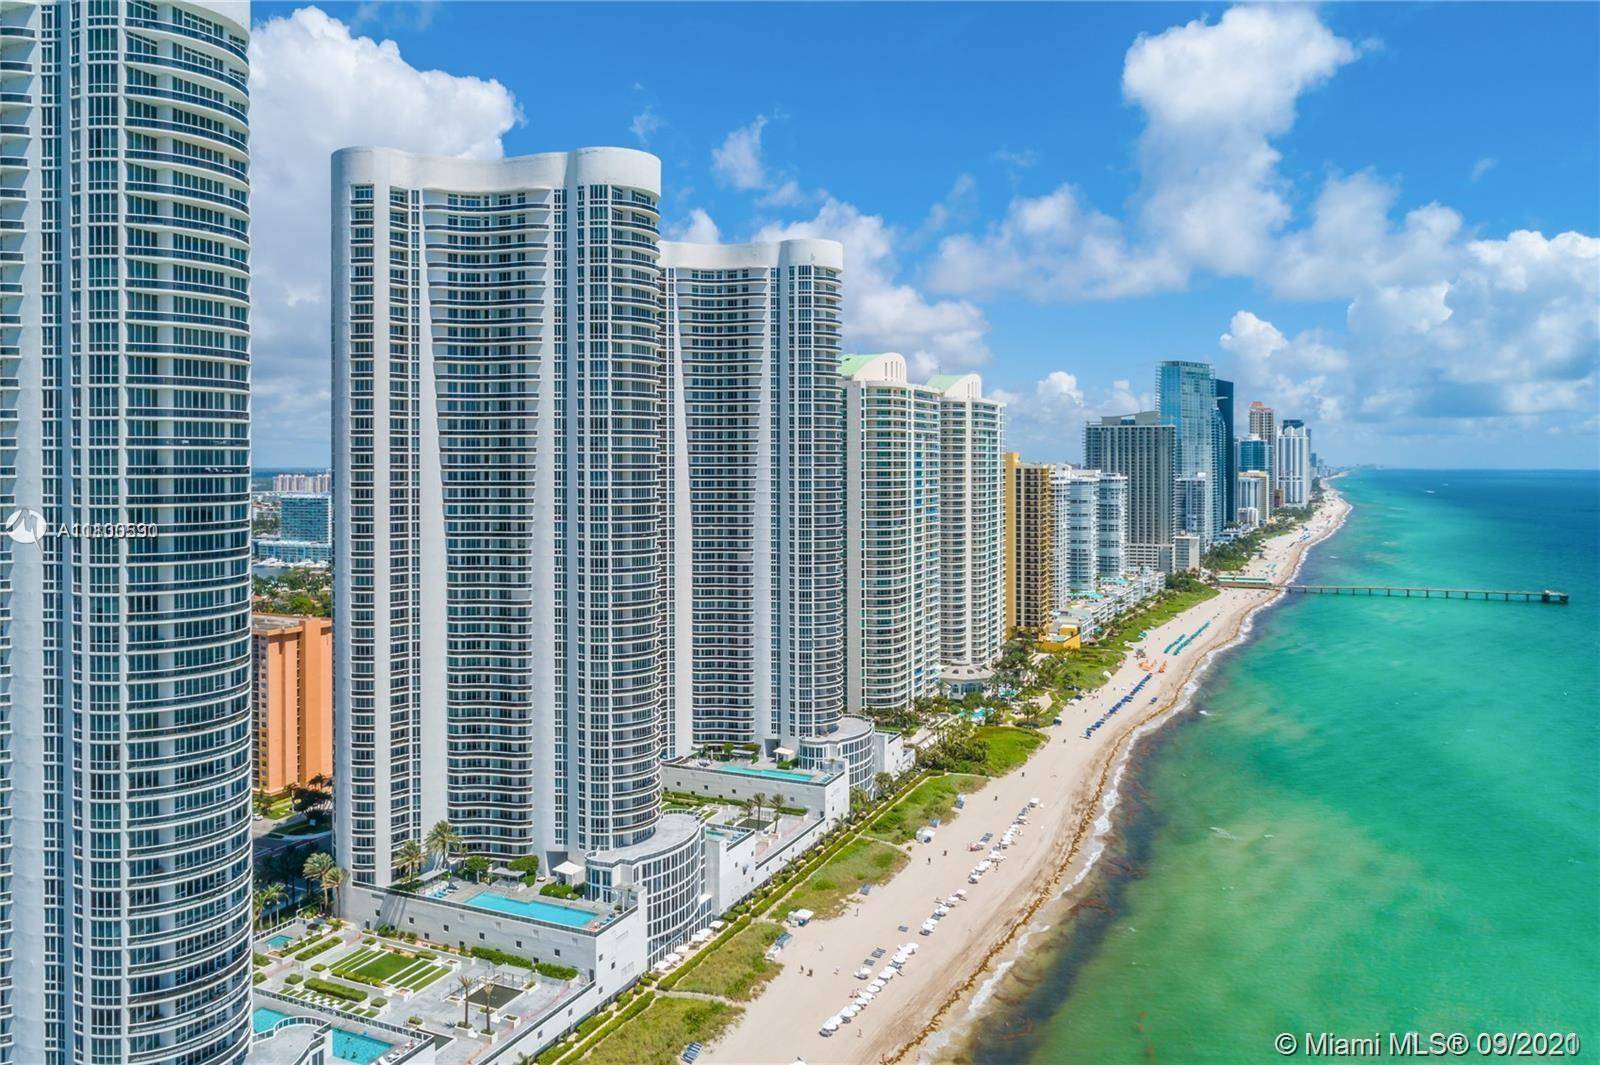 OCEAN FRONT PRESTIGIOUS TRUMP TOWER III STUNNING SOUTH EAST EXPOSURE WITH BREATHTAKING VIEWS OF THE INTRACOASTAL CITY FROM 41st FLOOR 11 FOOT CEILINGS PROFESSIONALLY DECORATED BEAITUFUL 2 BED 2 BATH ...